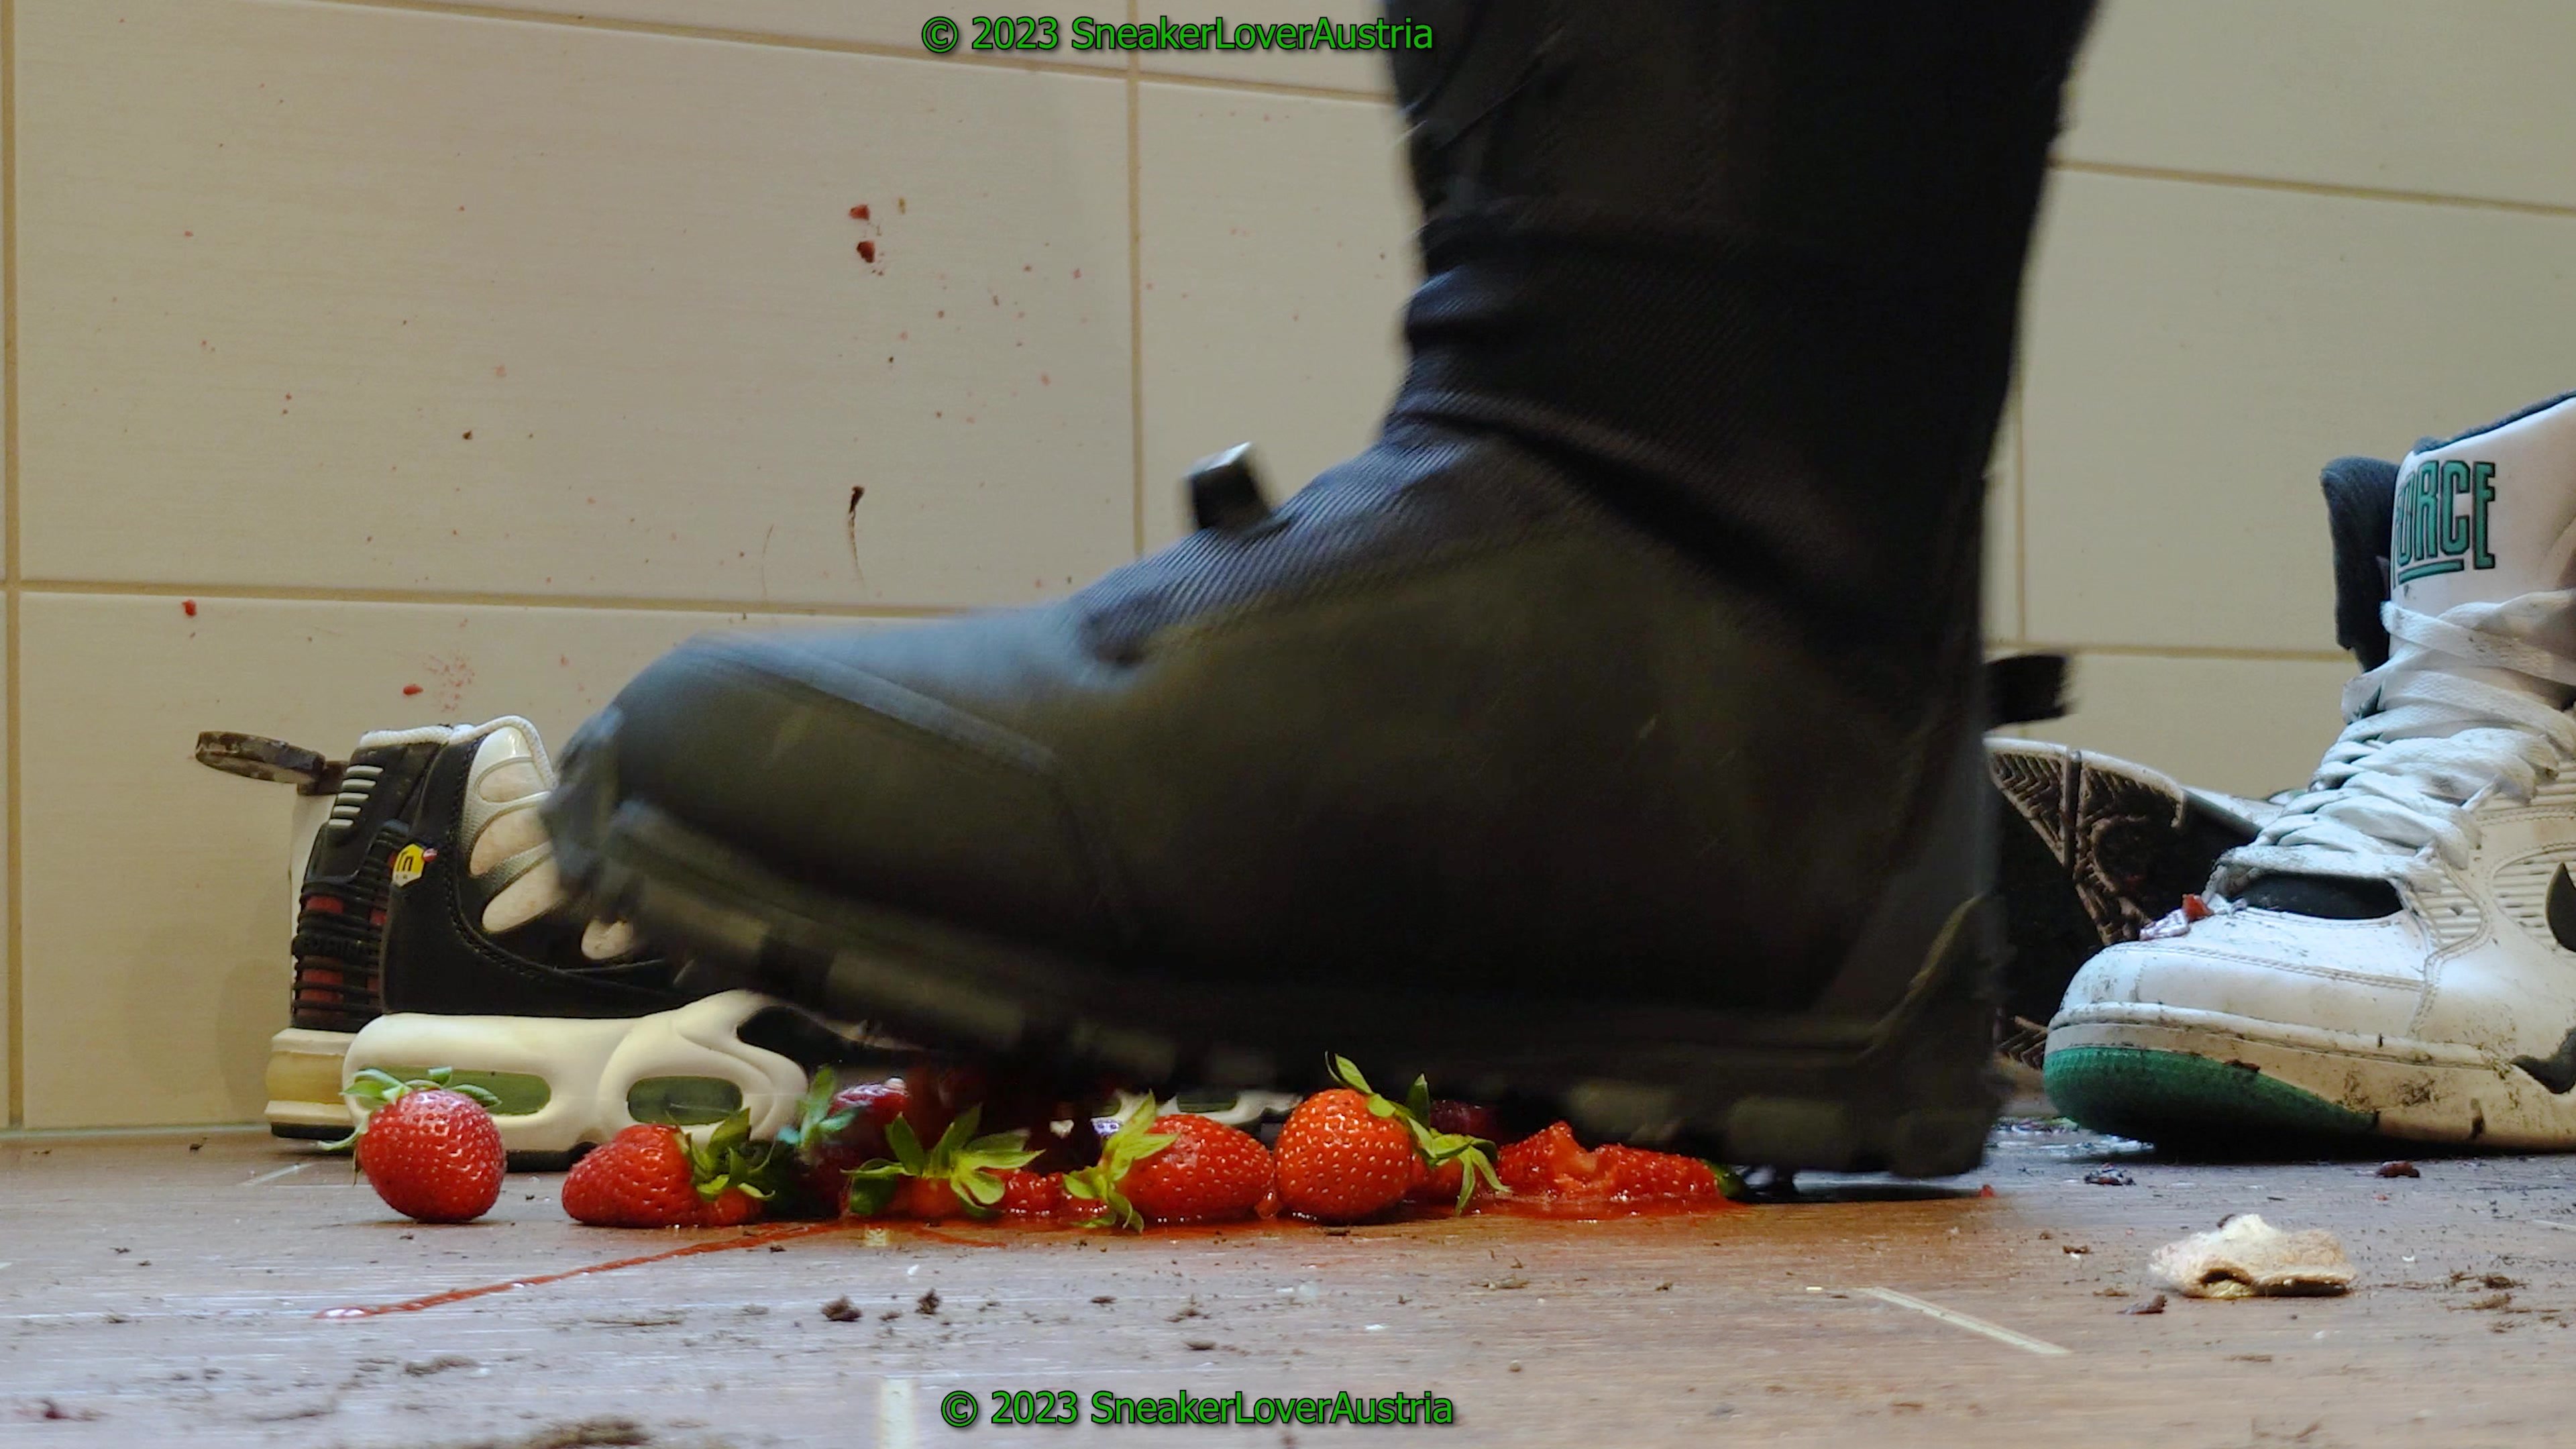 stomping strawberries with FXR snow boots